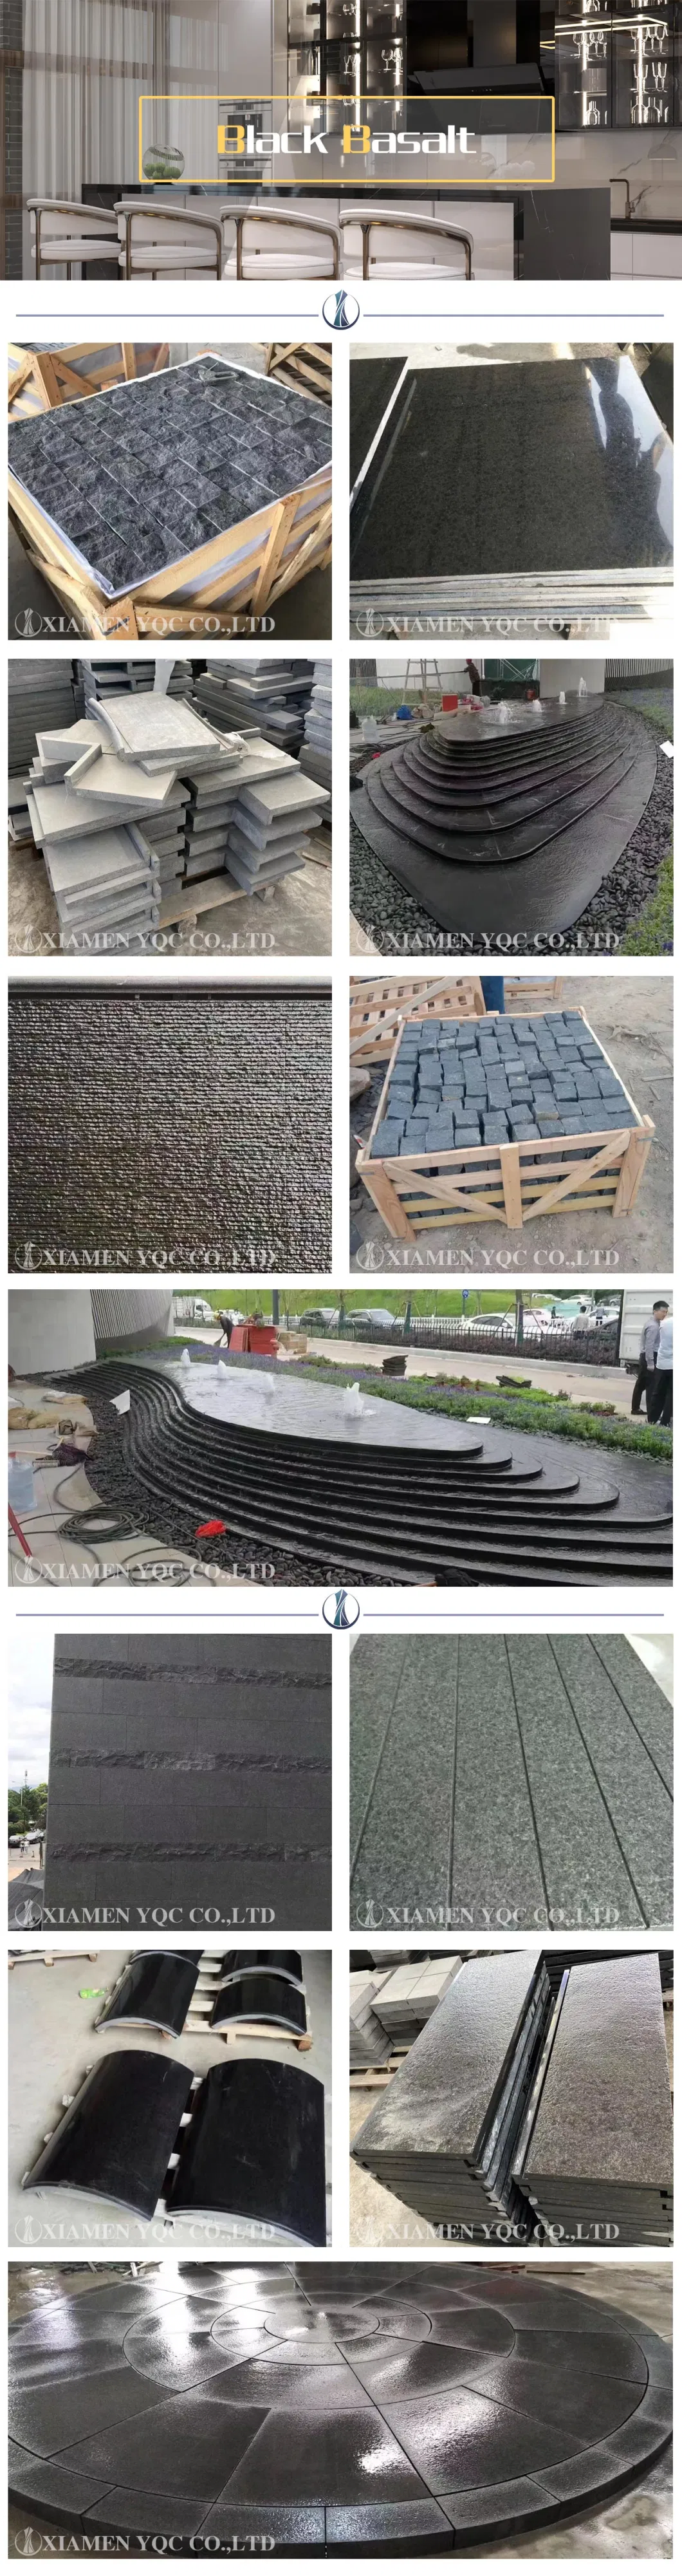 Fuding Black/Flamed Pearl Black G684 Basalt for Swimming Pool Coping/Floor Tiles/ Wall Clading/ Granite Paving/Stone/Slab/Lava/Stairs/Risers/Project/Price